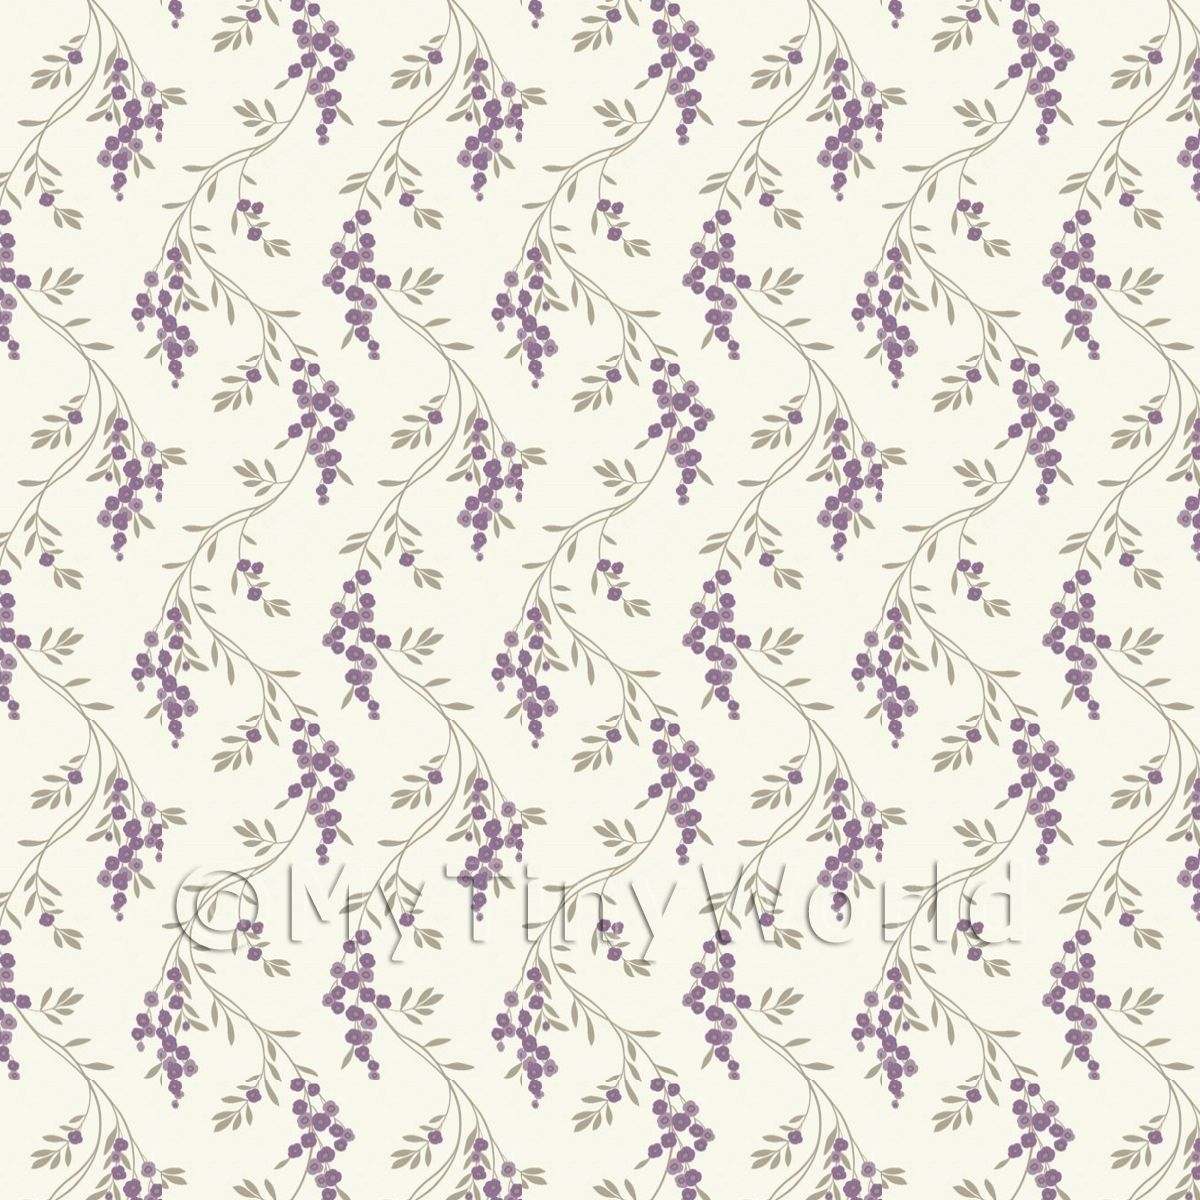 Dolls House Miniature Pink And Violet Mixed Flowers On Cream Wallpaper 